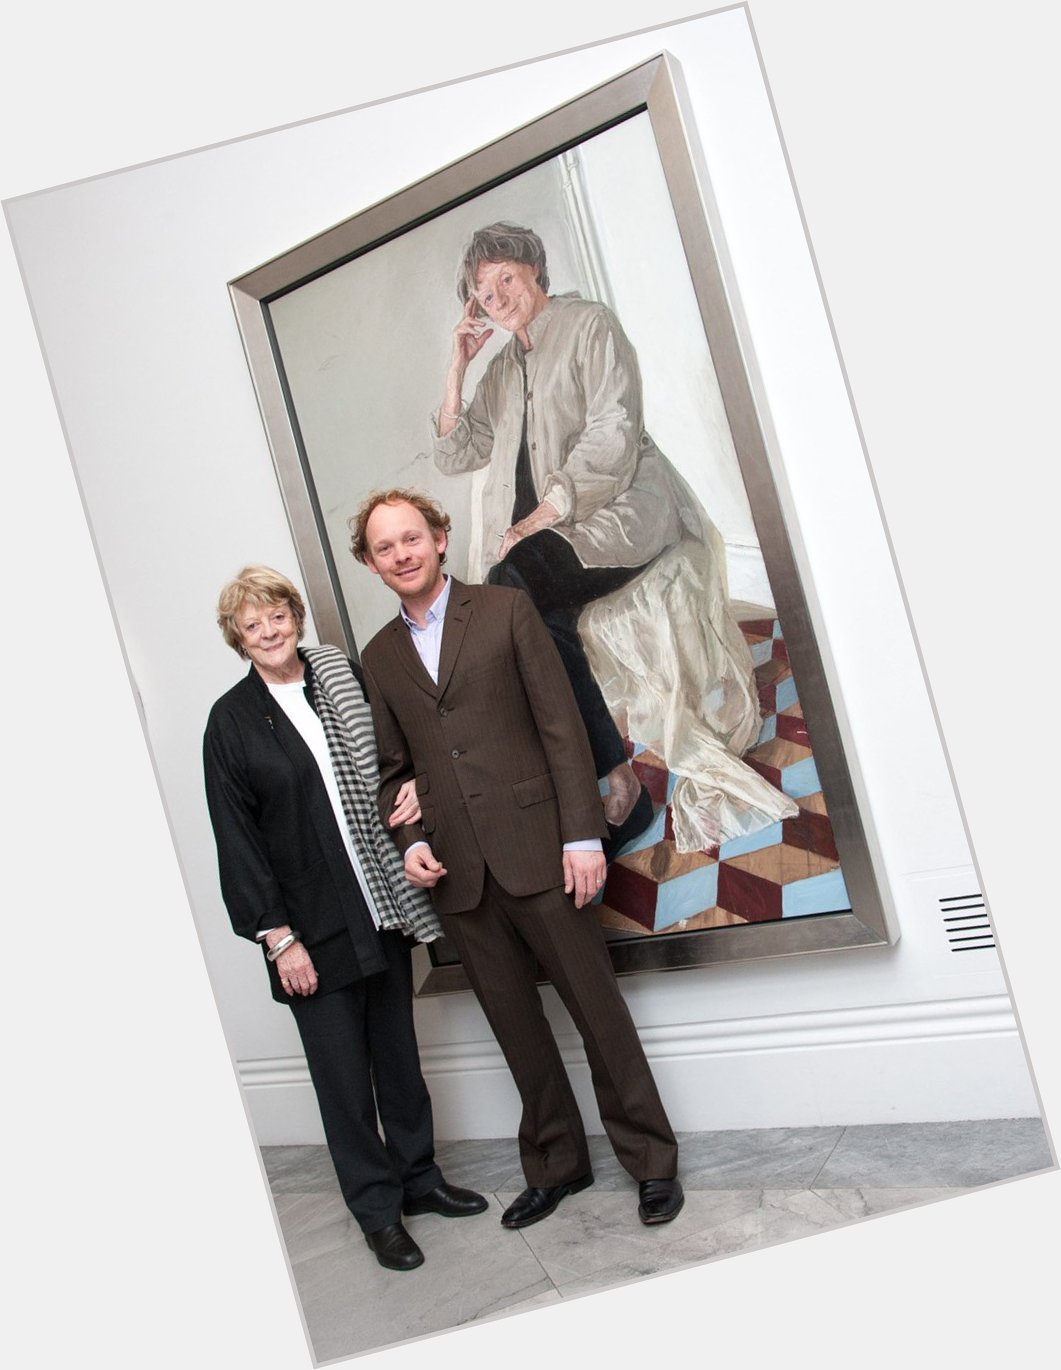 Happy 81st birthday to Dame Maggie Smith! See her portrait by James Lloyd on display in our contemporary galleries. 